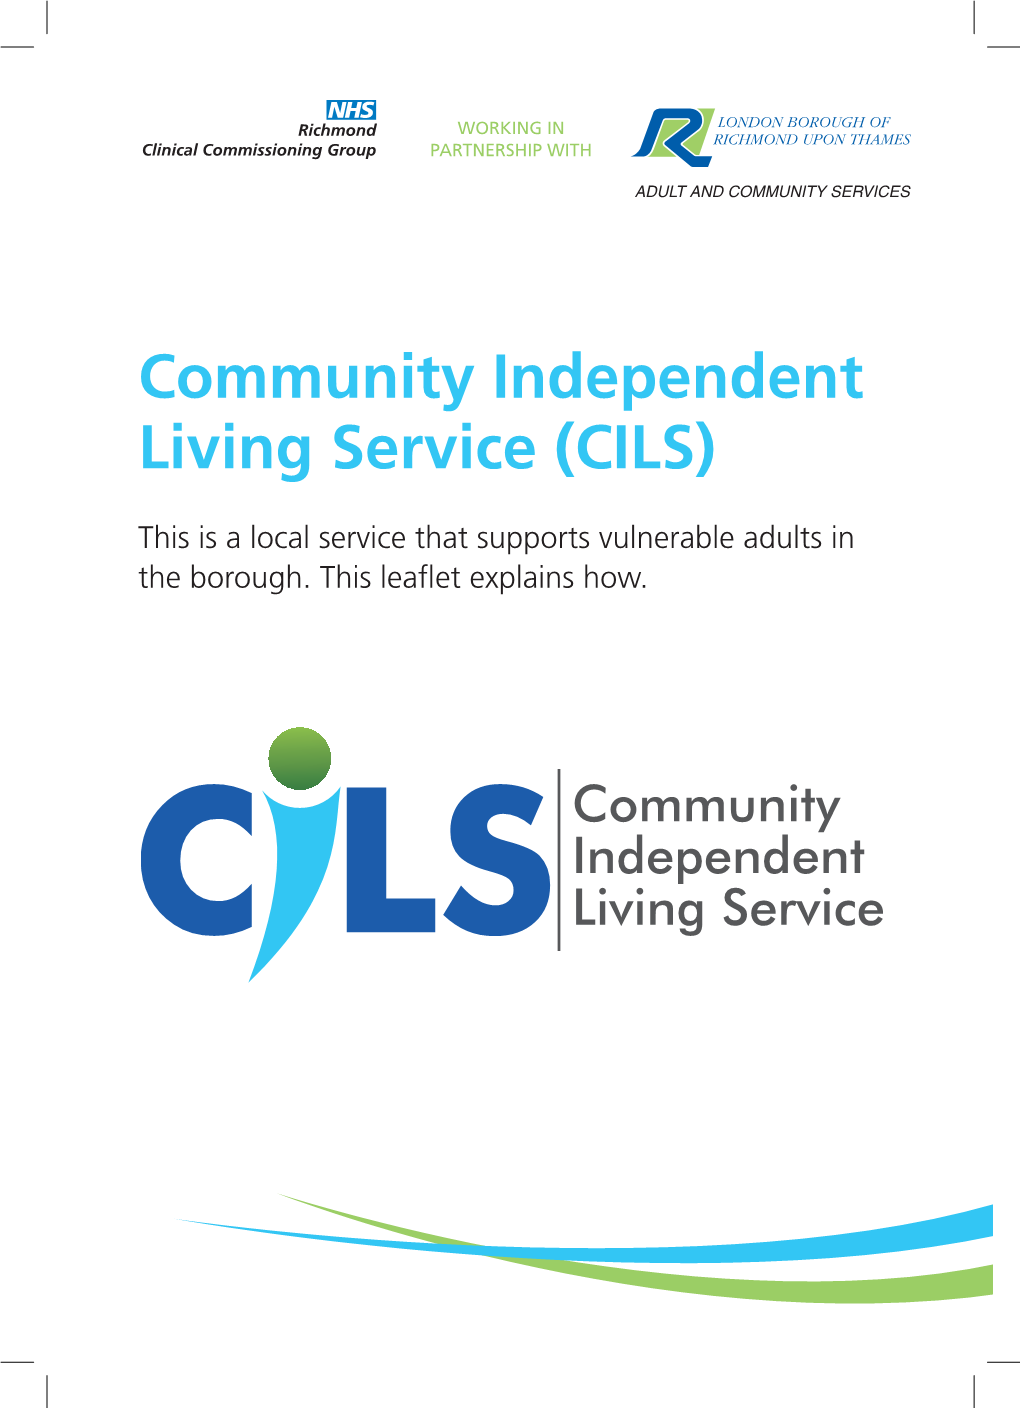 Community Independent Living Service (CILS)